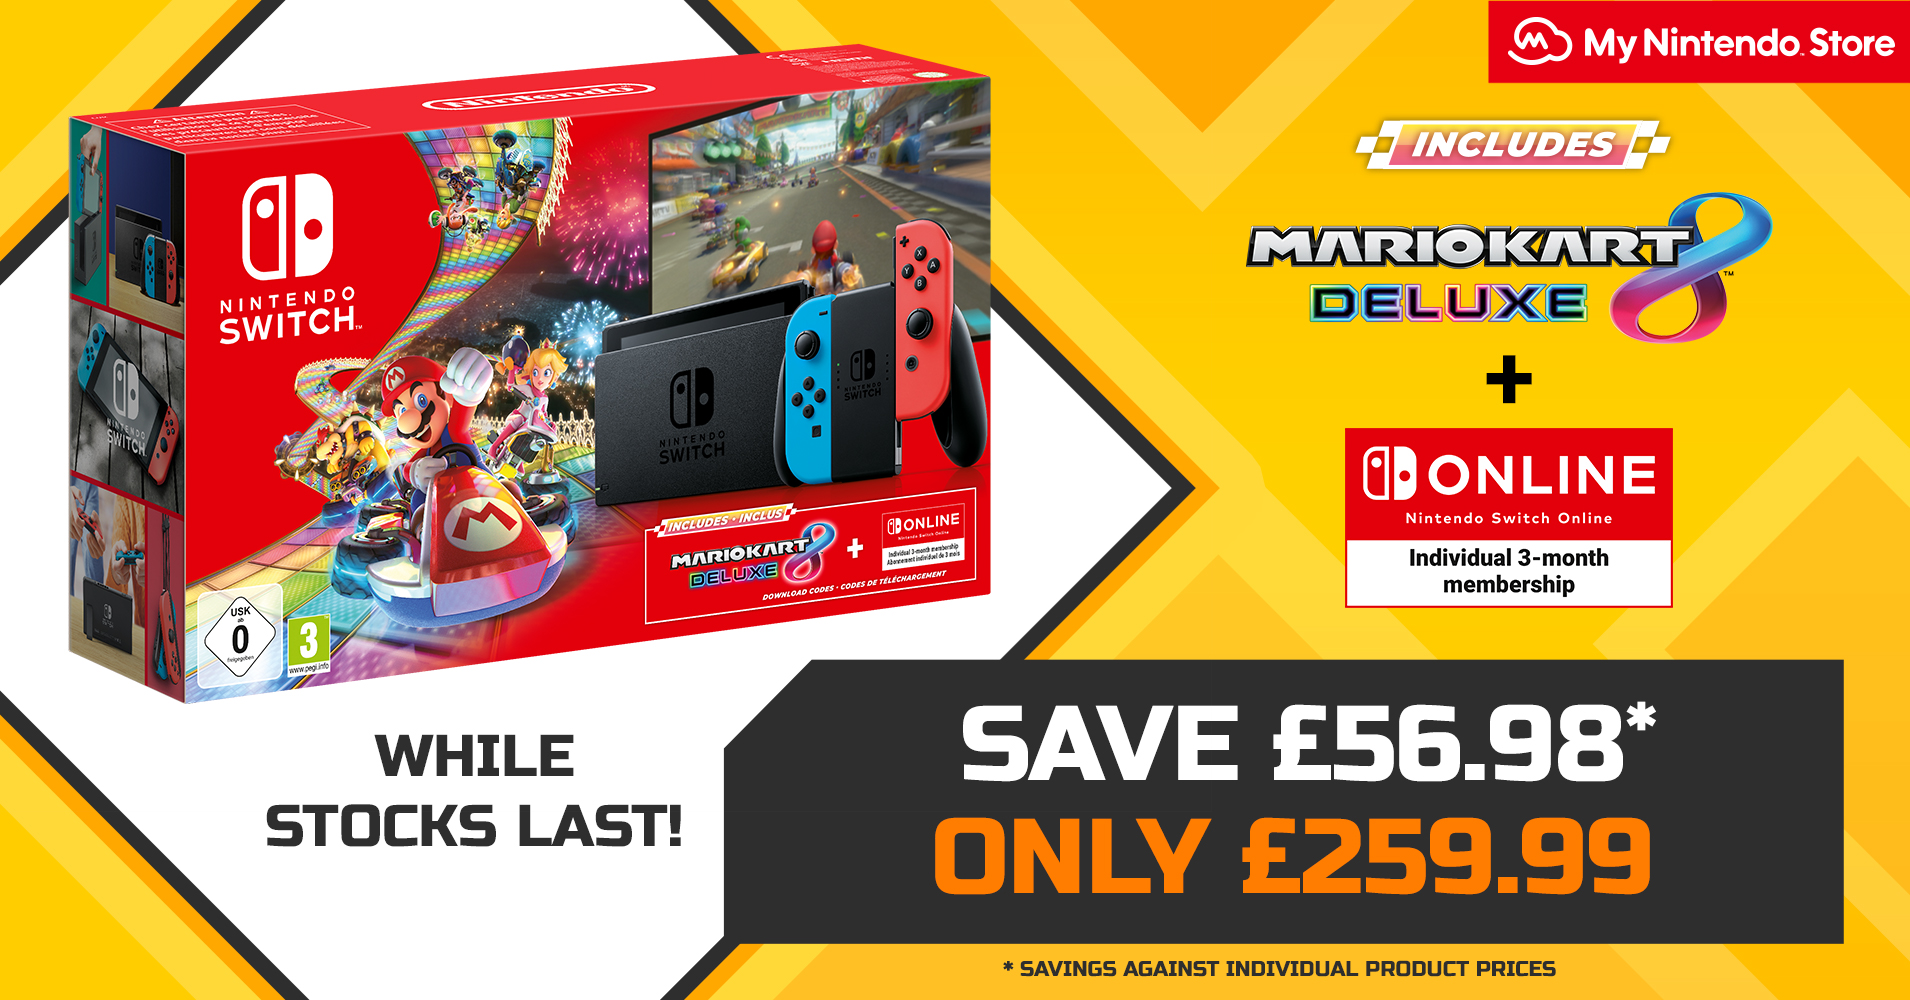 Nintendo Uk This Festive Blackfriday Bundle Contains A Nintendoswitch Neon Blue Neon Red Mario Kart 8 Deluxe Download Code And Nintendo Switch Online Individual 3 Months All For Just 259 99